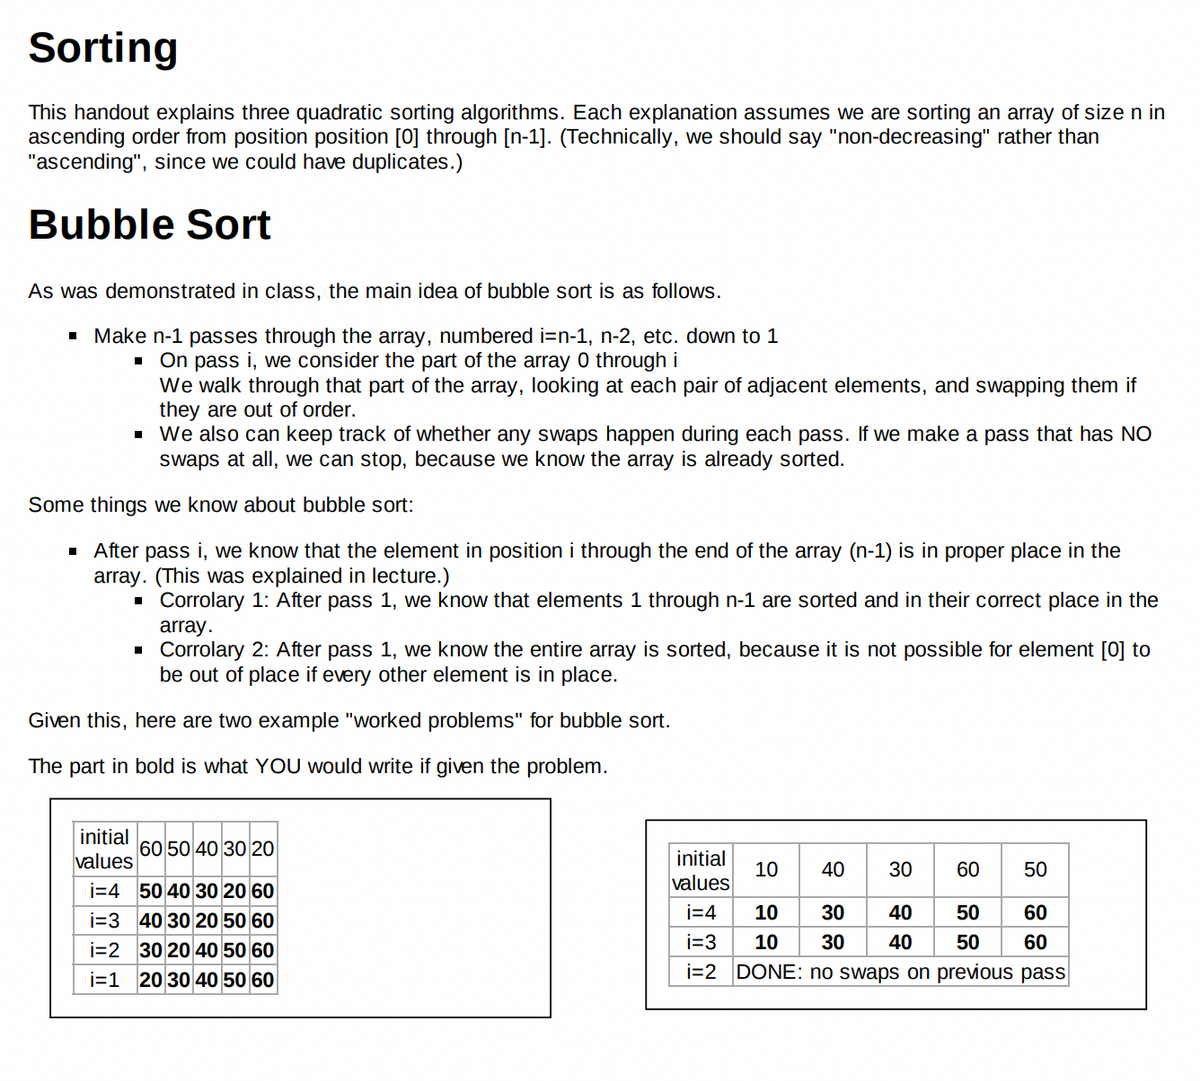 Sorting
This handout explains three quadratic sorting algorithms. Each explanation assumes we are sorting an array of size n in
ascending order from position position [0] through [n-1]. (Technically, we should say "non-decreasing" rather than
"ascending", since we could have duplicates.)
Bubble Sort
As was demonstrated in class, the main idea of bubble sort is as follows.
■ Make n-1 passes through the array, numbered i=n-1, n-2, etc. down to 1
On pass i, we consider the part of the array 0 through i
We walk through that part of the array, looking at each pair of adjacent elements, and swapping them if
they are out of order.
■
▪ We also can keep track of whether any swaps happen during each pass. If we make a pass that has NO
swaps at all, we can stop, because we know the array is already sorted.
Some things we know about bubble sort:
▪ After pass i, we know that the element in position i through the end of the array (n-1) is in proper place in the
array. (This was explained in lecture.)
■ Corrolary 1: After pass 1, we know that elements 1 through n-1 are sorted and in their correct place in the
array.
■
Corrolary 2: After pass 1, we know the entire array is sorted, because it is not possible for element [0] to
be out of place if every other element is in place.
Given this, here are two example "worked problems" for bubble sort.
The part in bold is what YOU would write if given the problem.
initial
60 50 40 30 20
values
i=4 50 40 30 20 60
i=3 40 30 20 50 60
i=2
30 20 40 50 60
i=1 20 30 40 50 60
initial
values
10 40 30
60 50
i=4
10
50 60
50 60
i=3
10 30 40
i=2 DONE: no swaps on previous pass